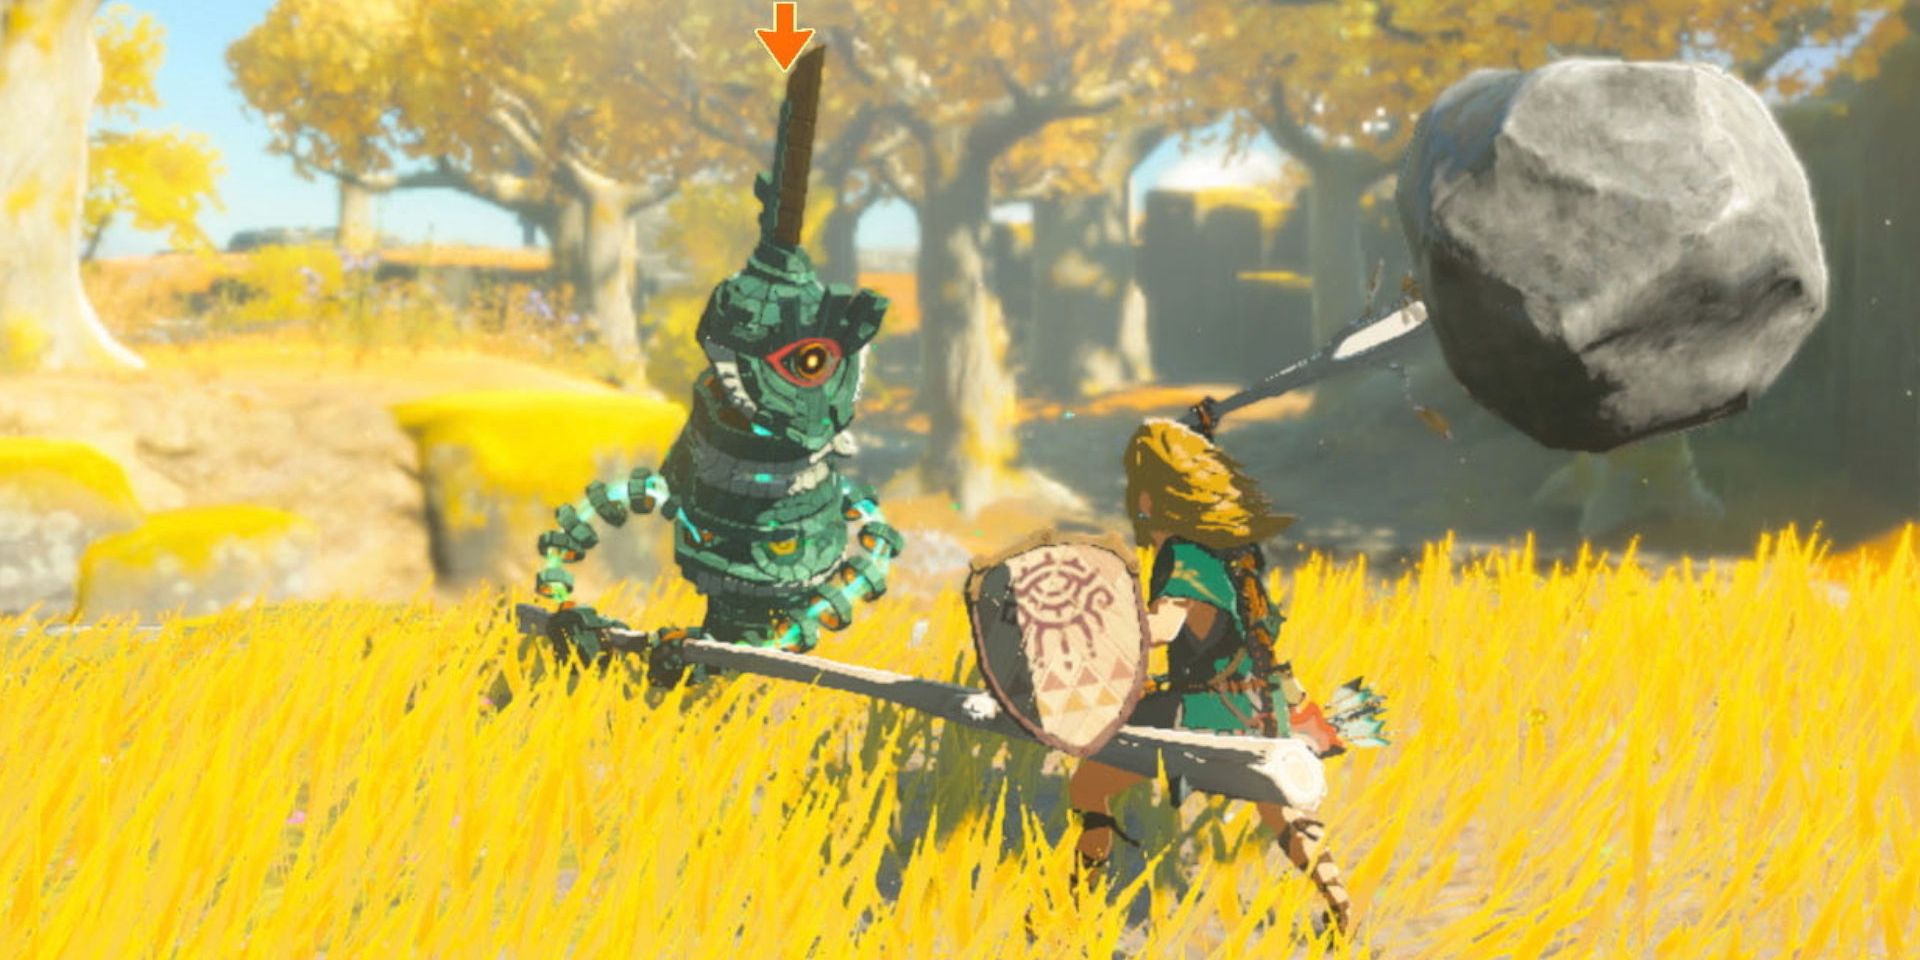 Link swings a rock-tipped sword at a mechanical enemy in a grassy field in The Legend of Zelda: Tears of the Kingdom.